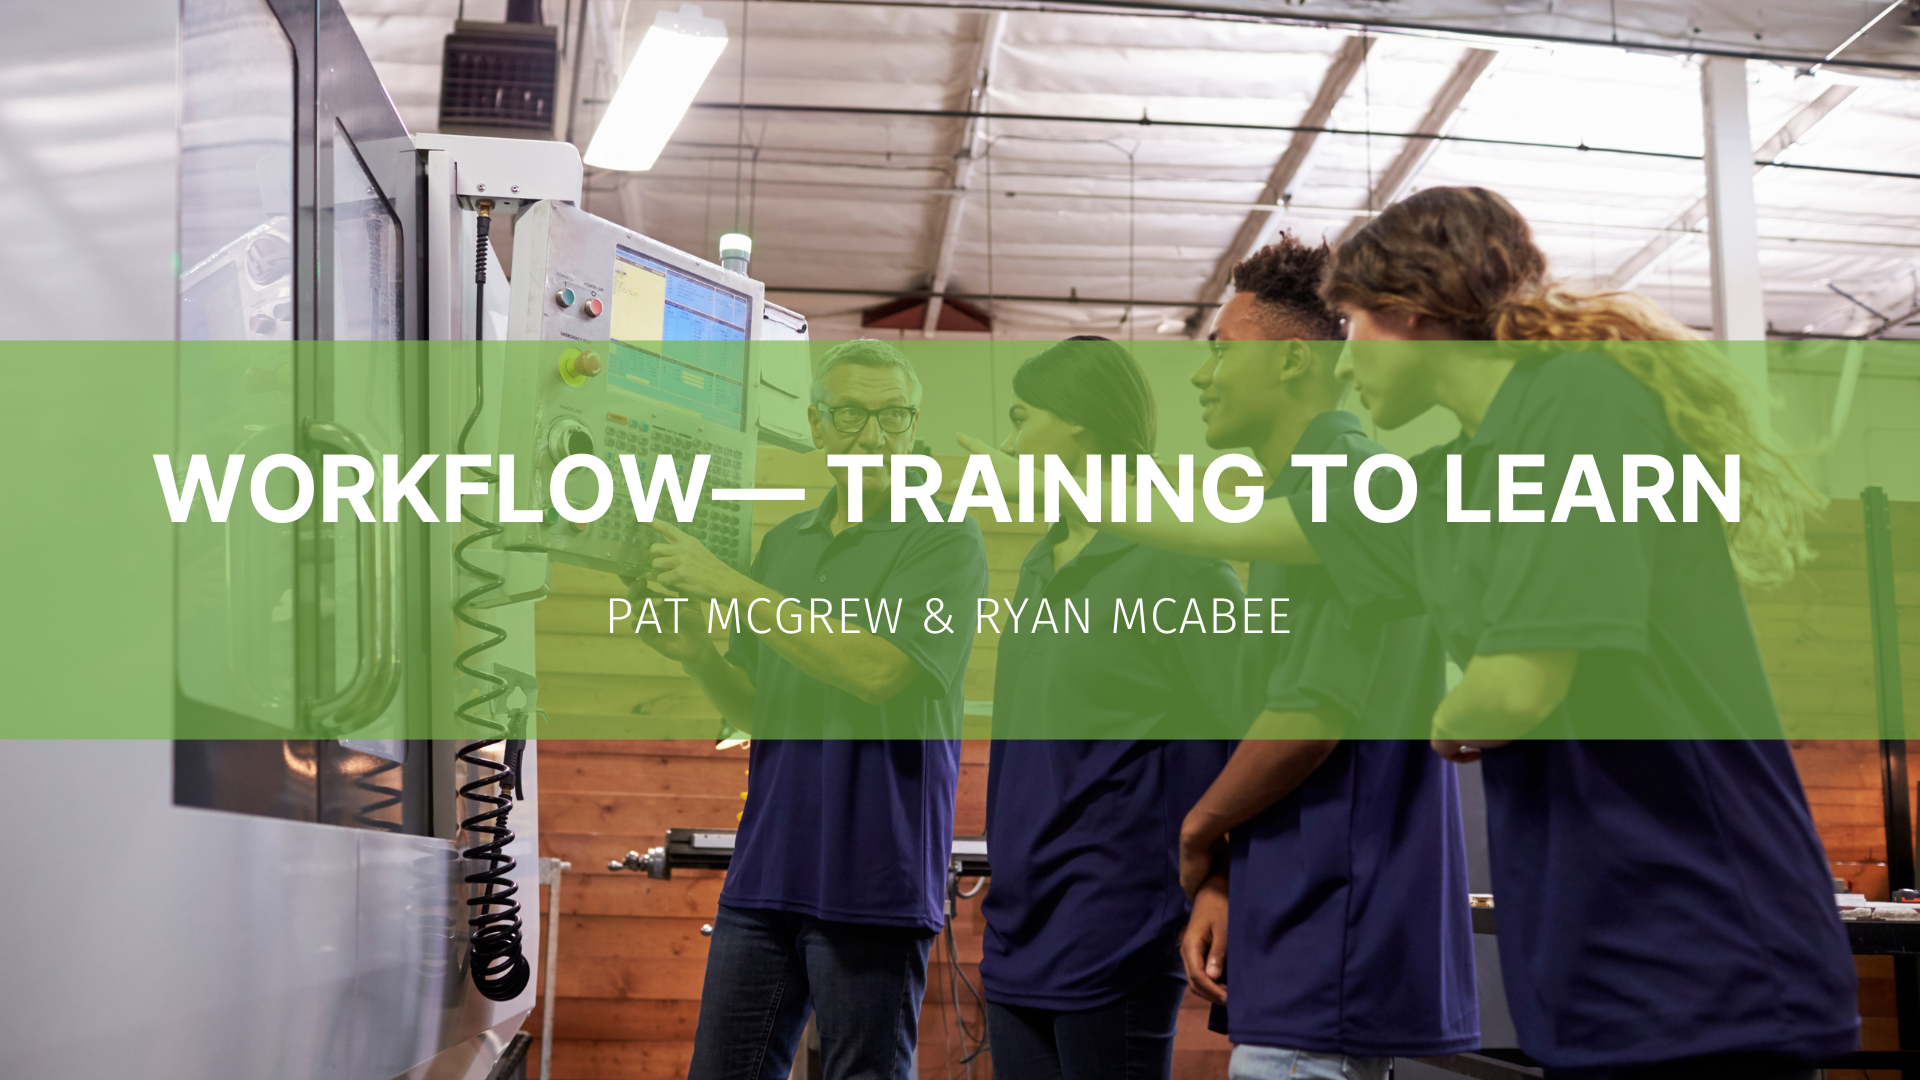 Featured image for “Workflow— Training to Learn”